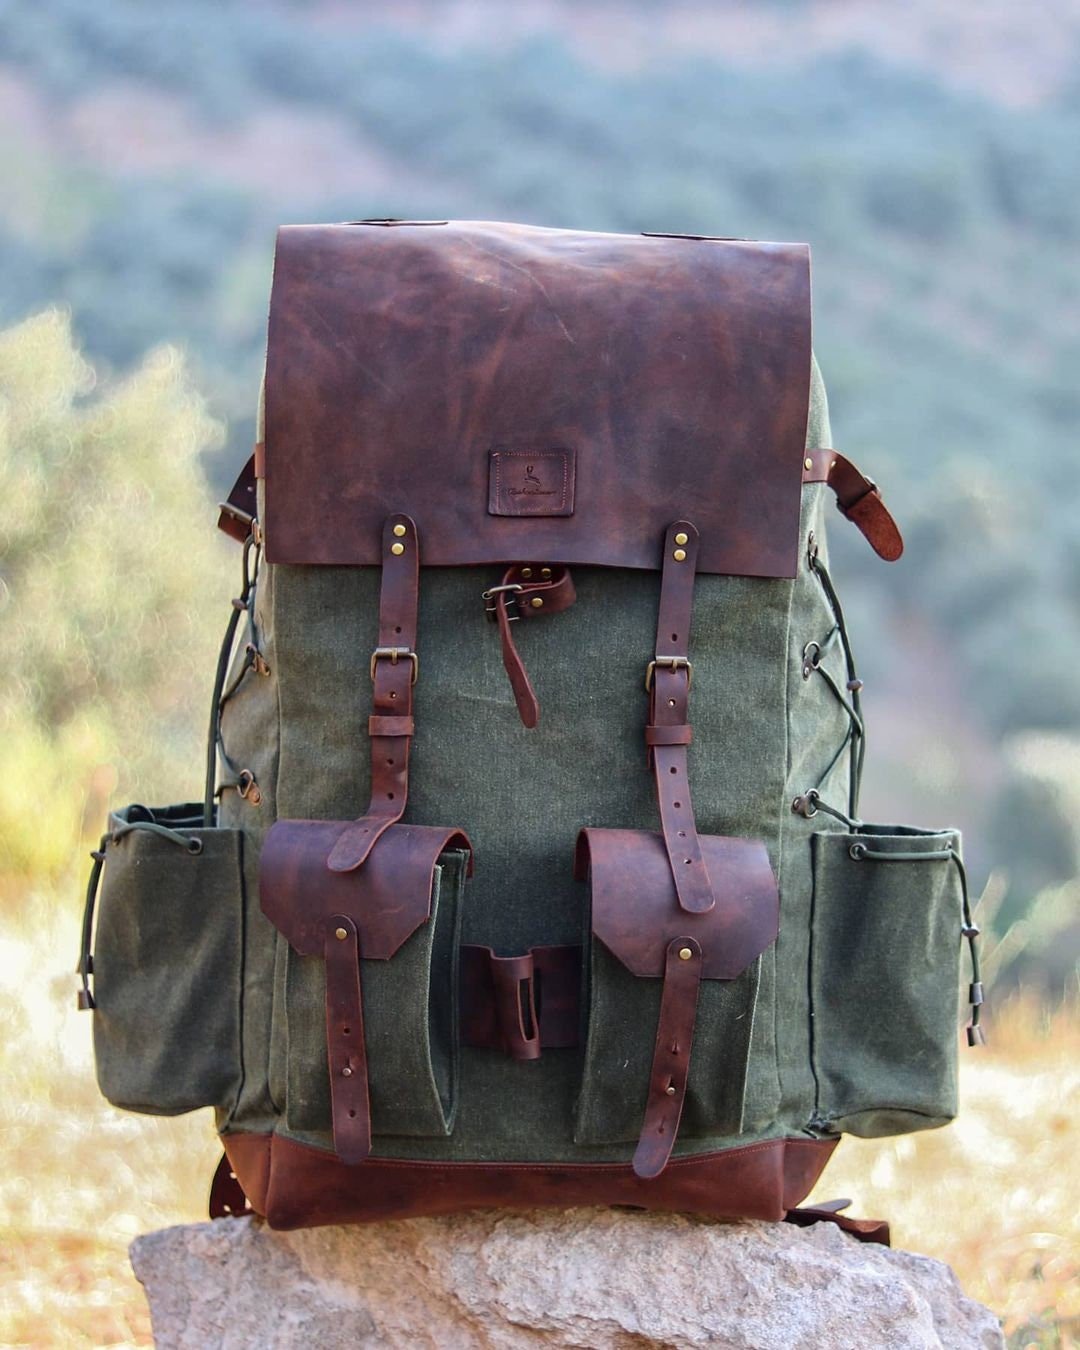 Limited Bestseller Handmade Genuine Leather and Waxed Canvas Backpack for Travel, Camping, Green, Brown options | 50 Liters |Personalization Backpack,rucksack 99percenthandmade   